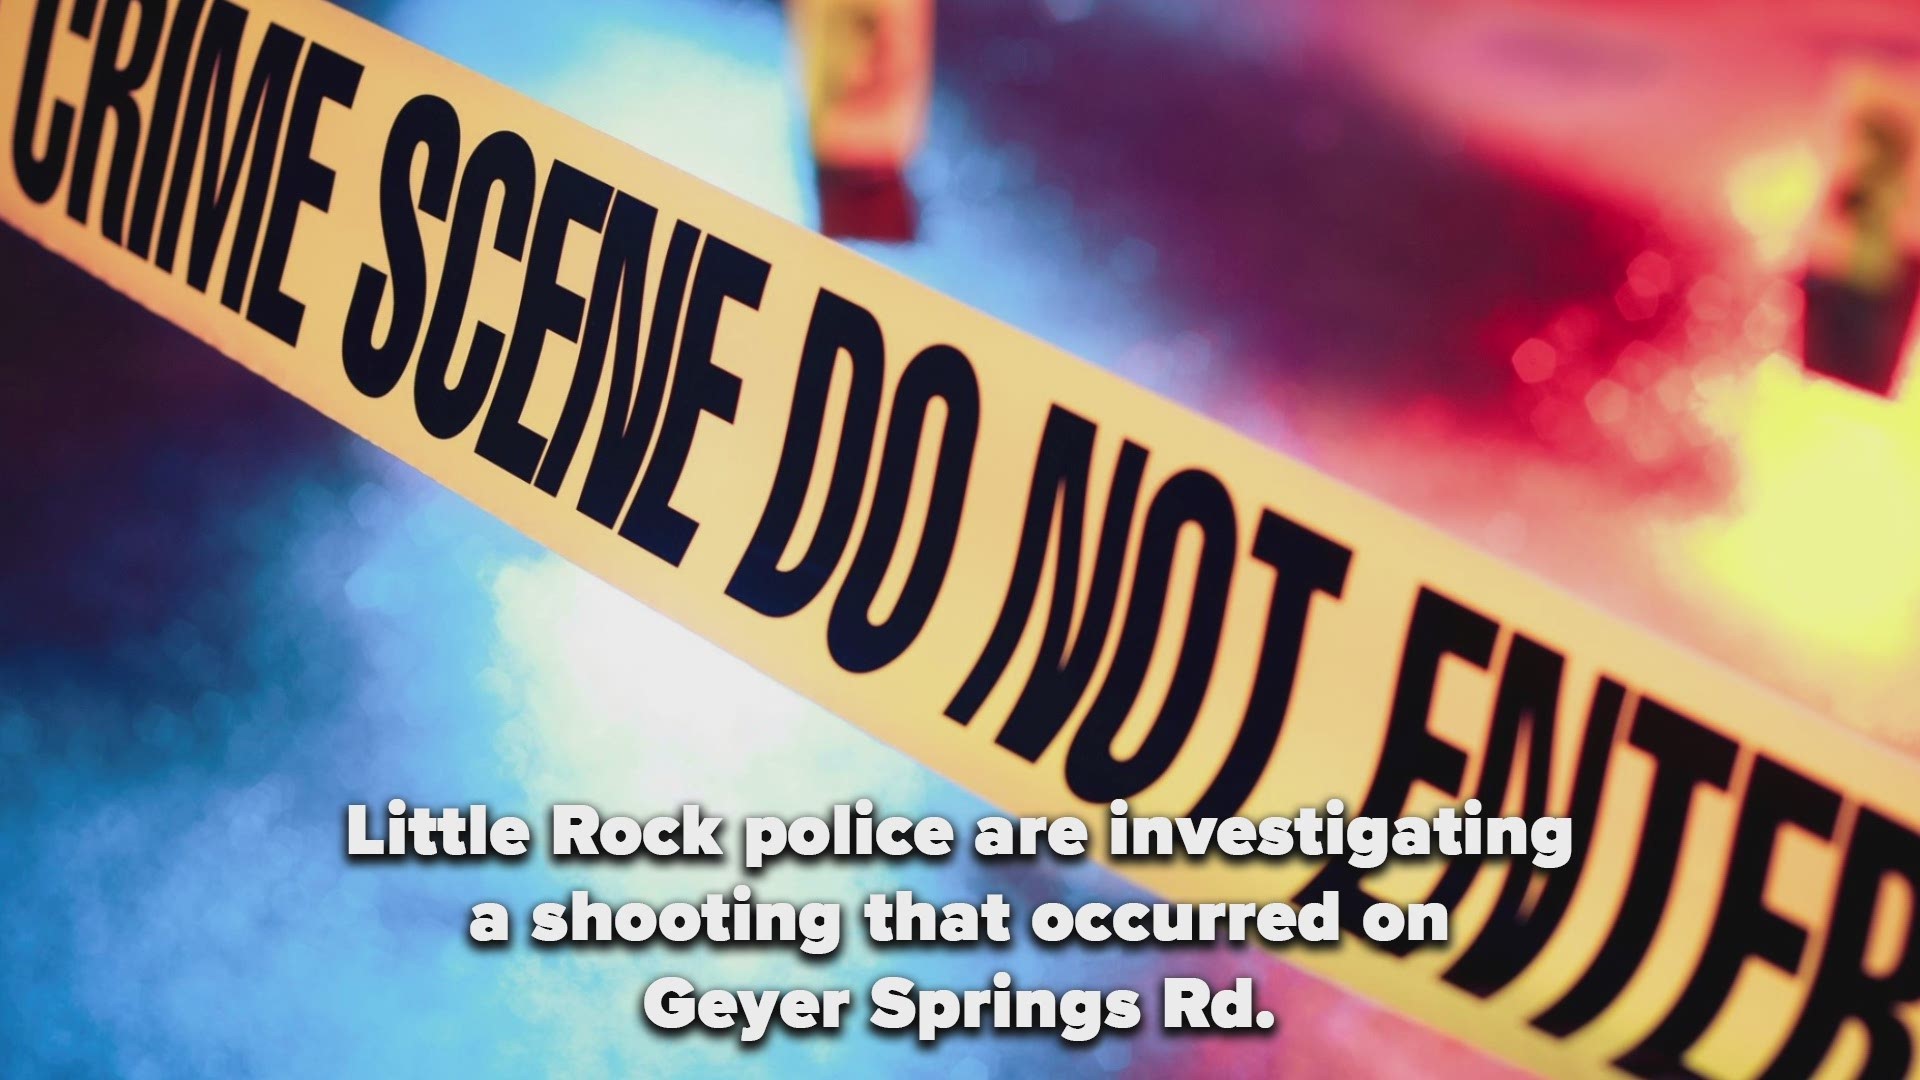 According to LRPD, officers are on the scene of a shooting on Geyer Springs Rd.